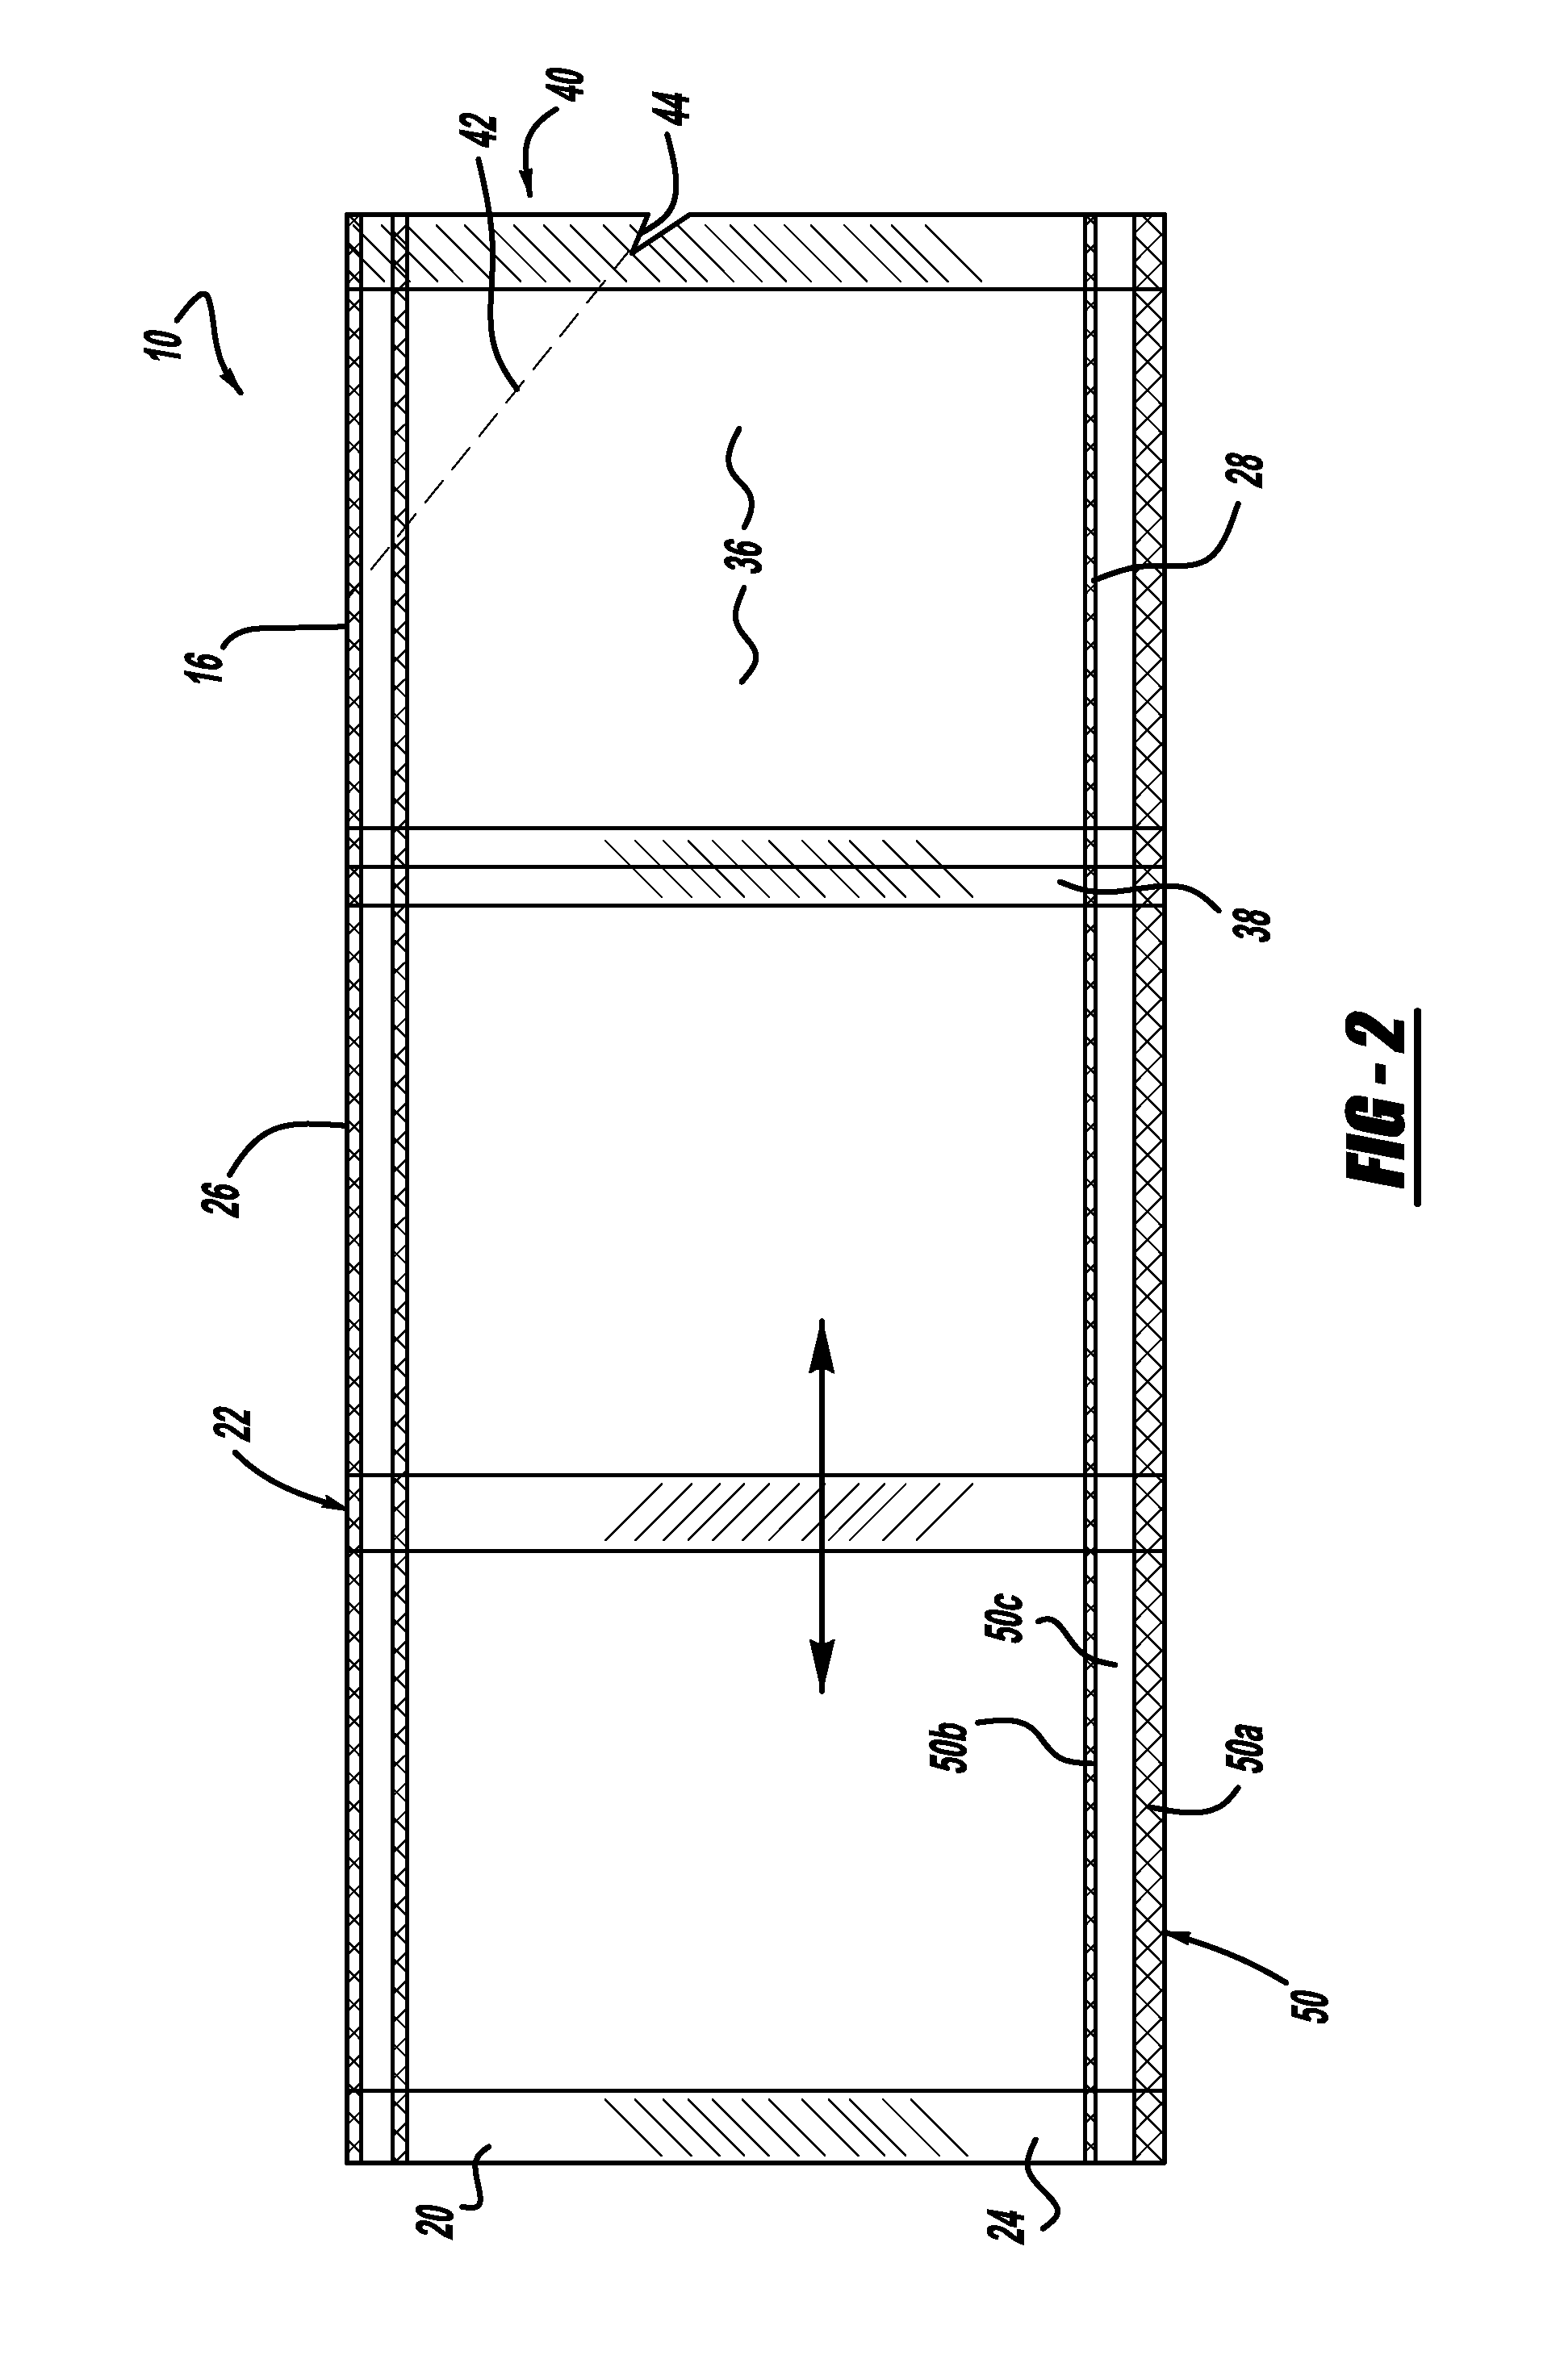 Multi-compartment flexible pouch with an insulated compartment